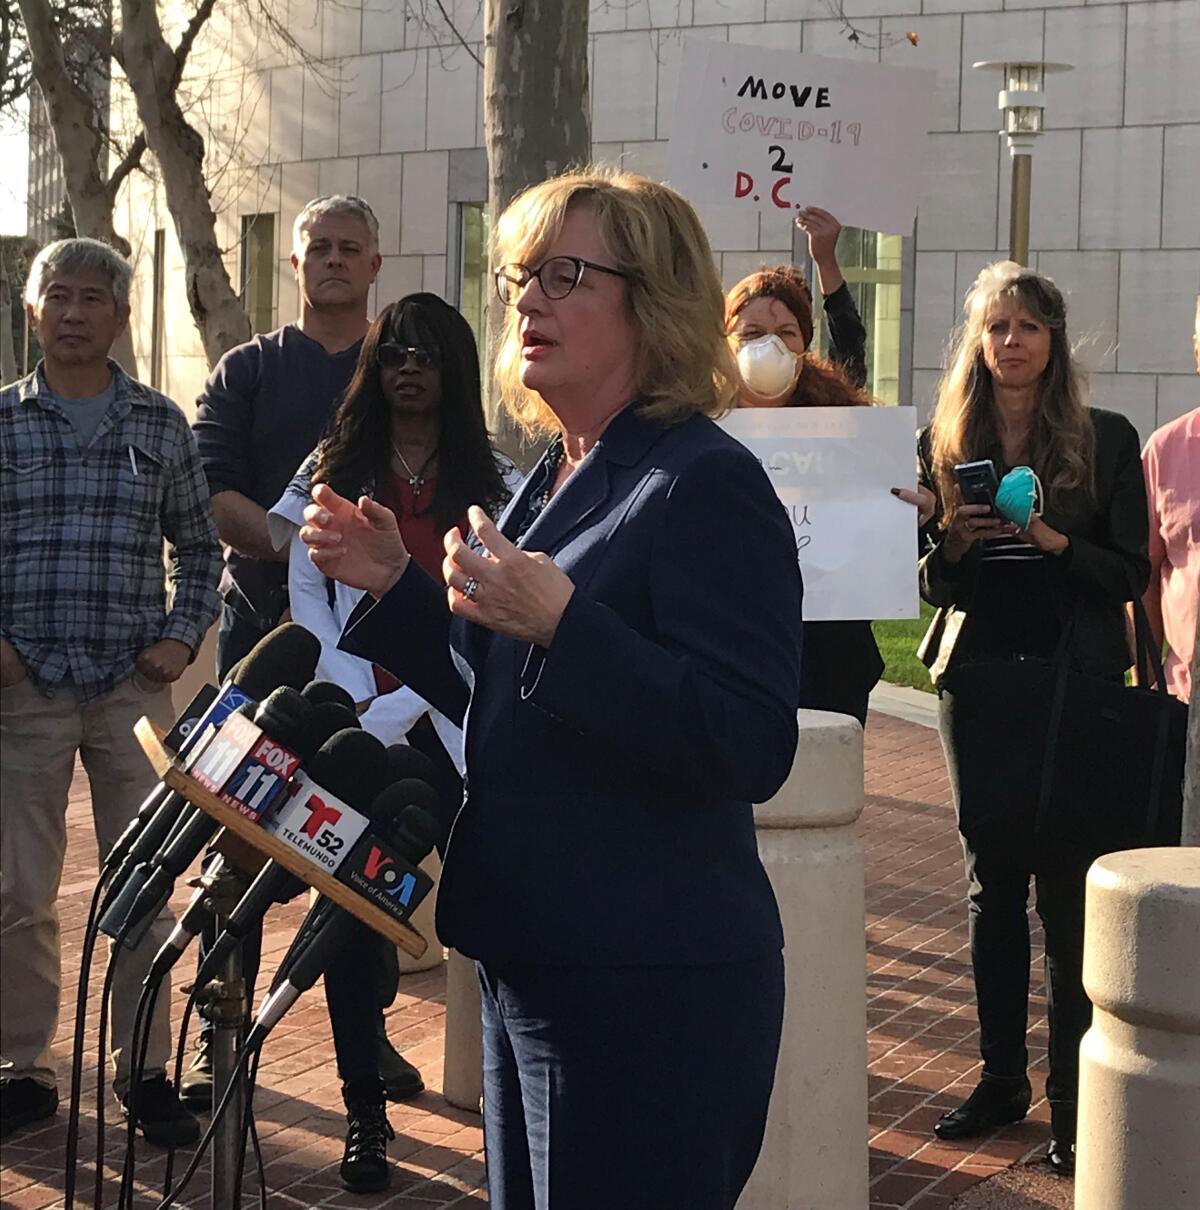 Costa Mesa Mayor Katrina Foley says the city is not pursuing more legal action related to preventing the possibility of coronavirus patients being sent to the Fairview Developmental Center. Instead, Foley says, the city is focusing on its emergency response protocols.